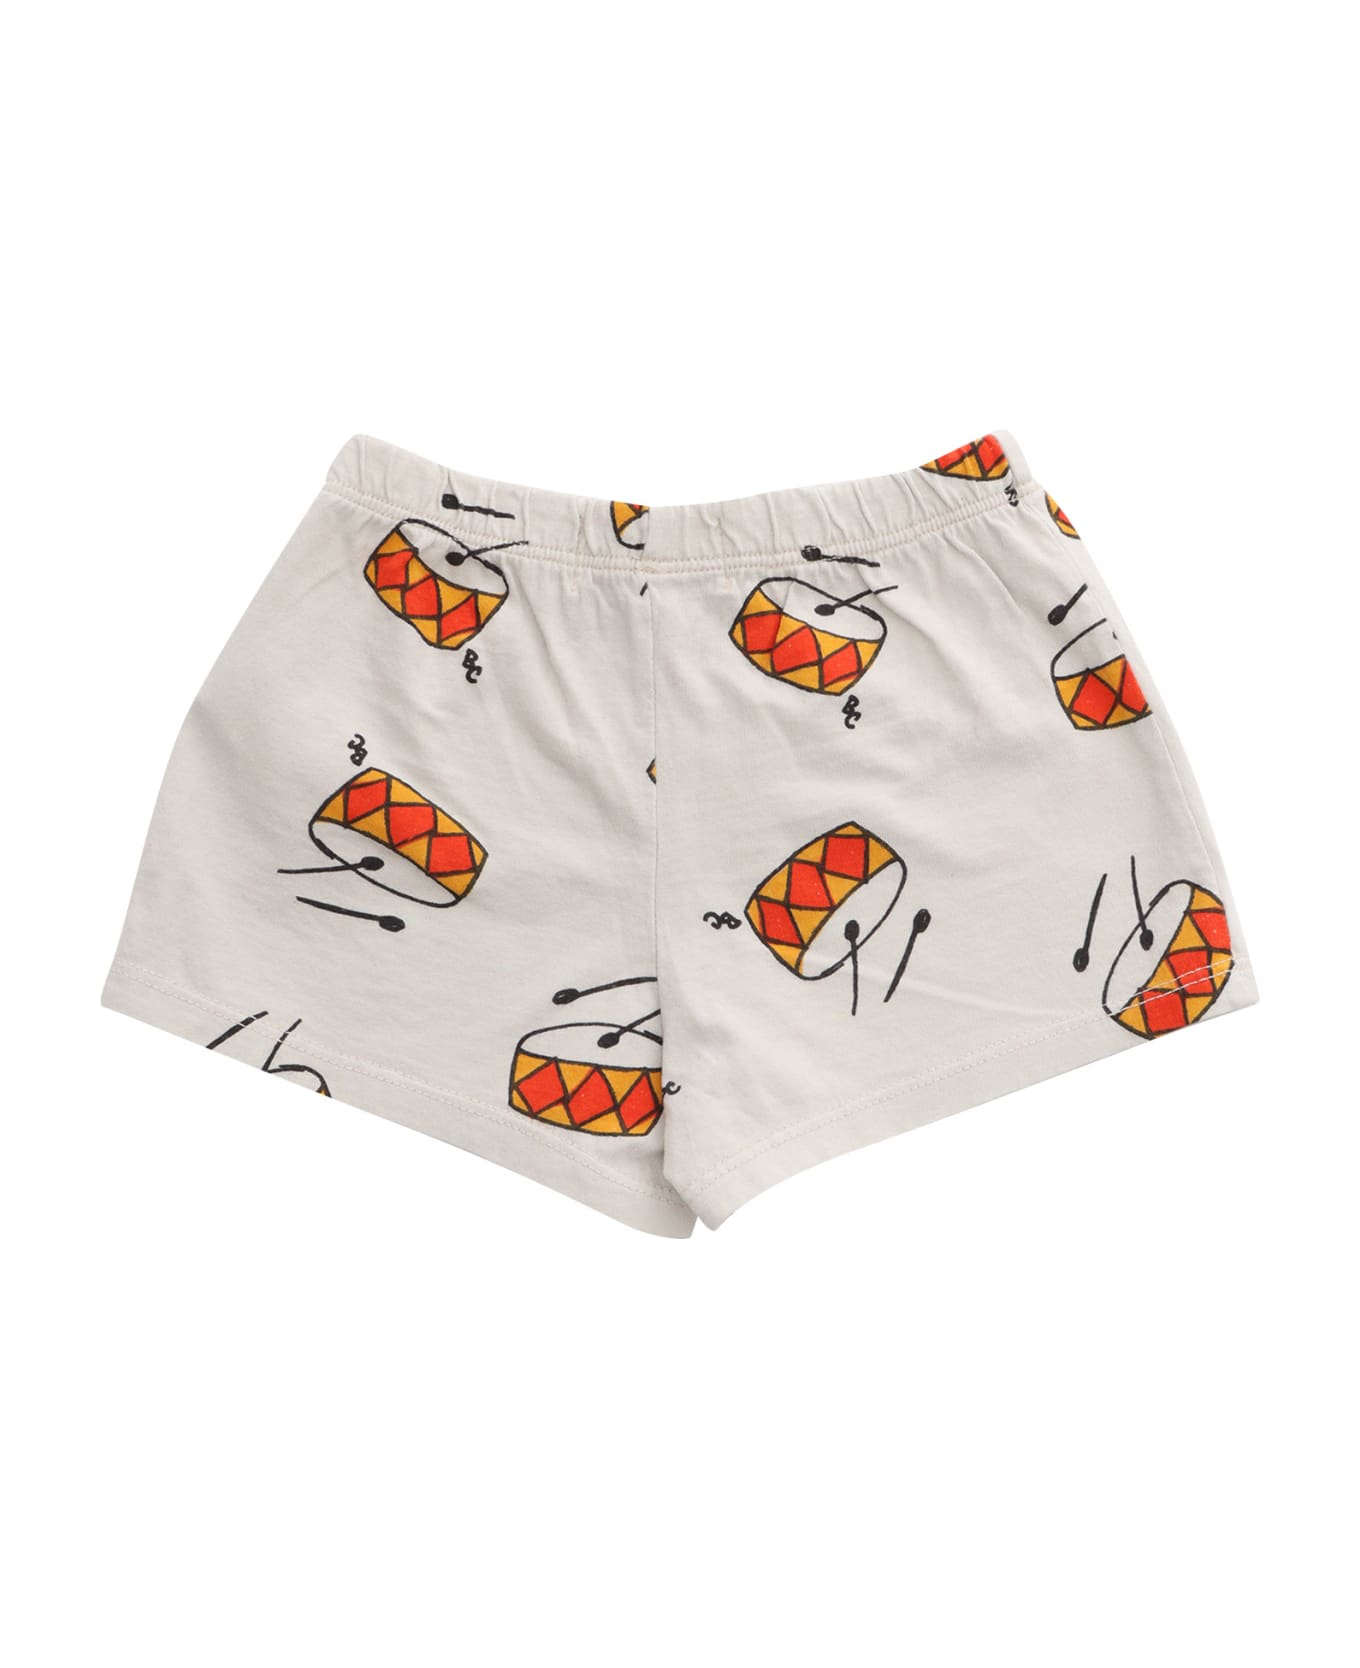 Bobo Choses White Shorts With Prints - BEIGE